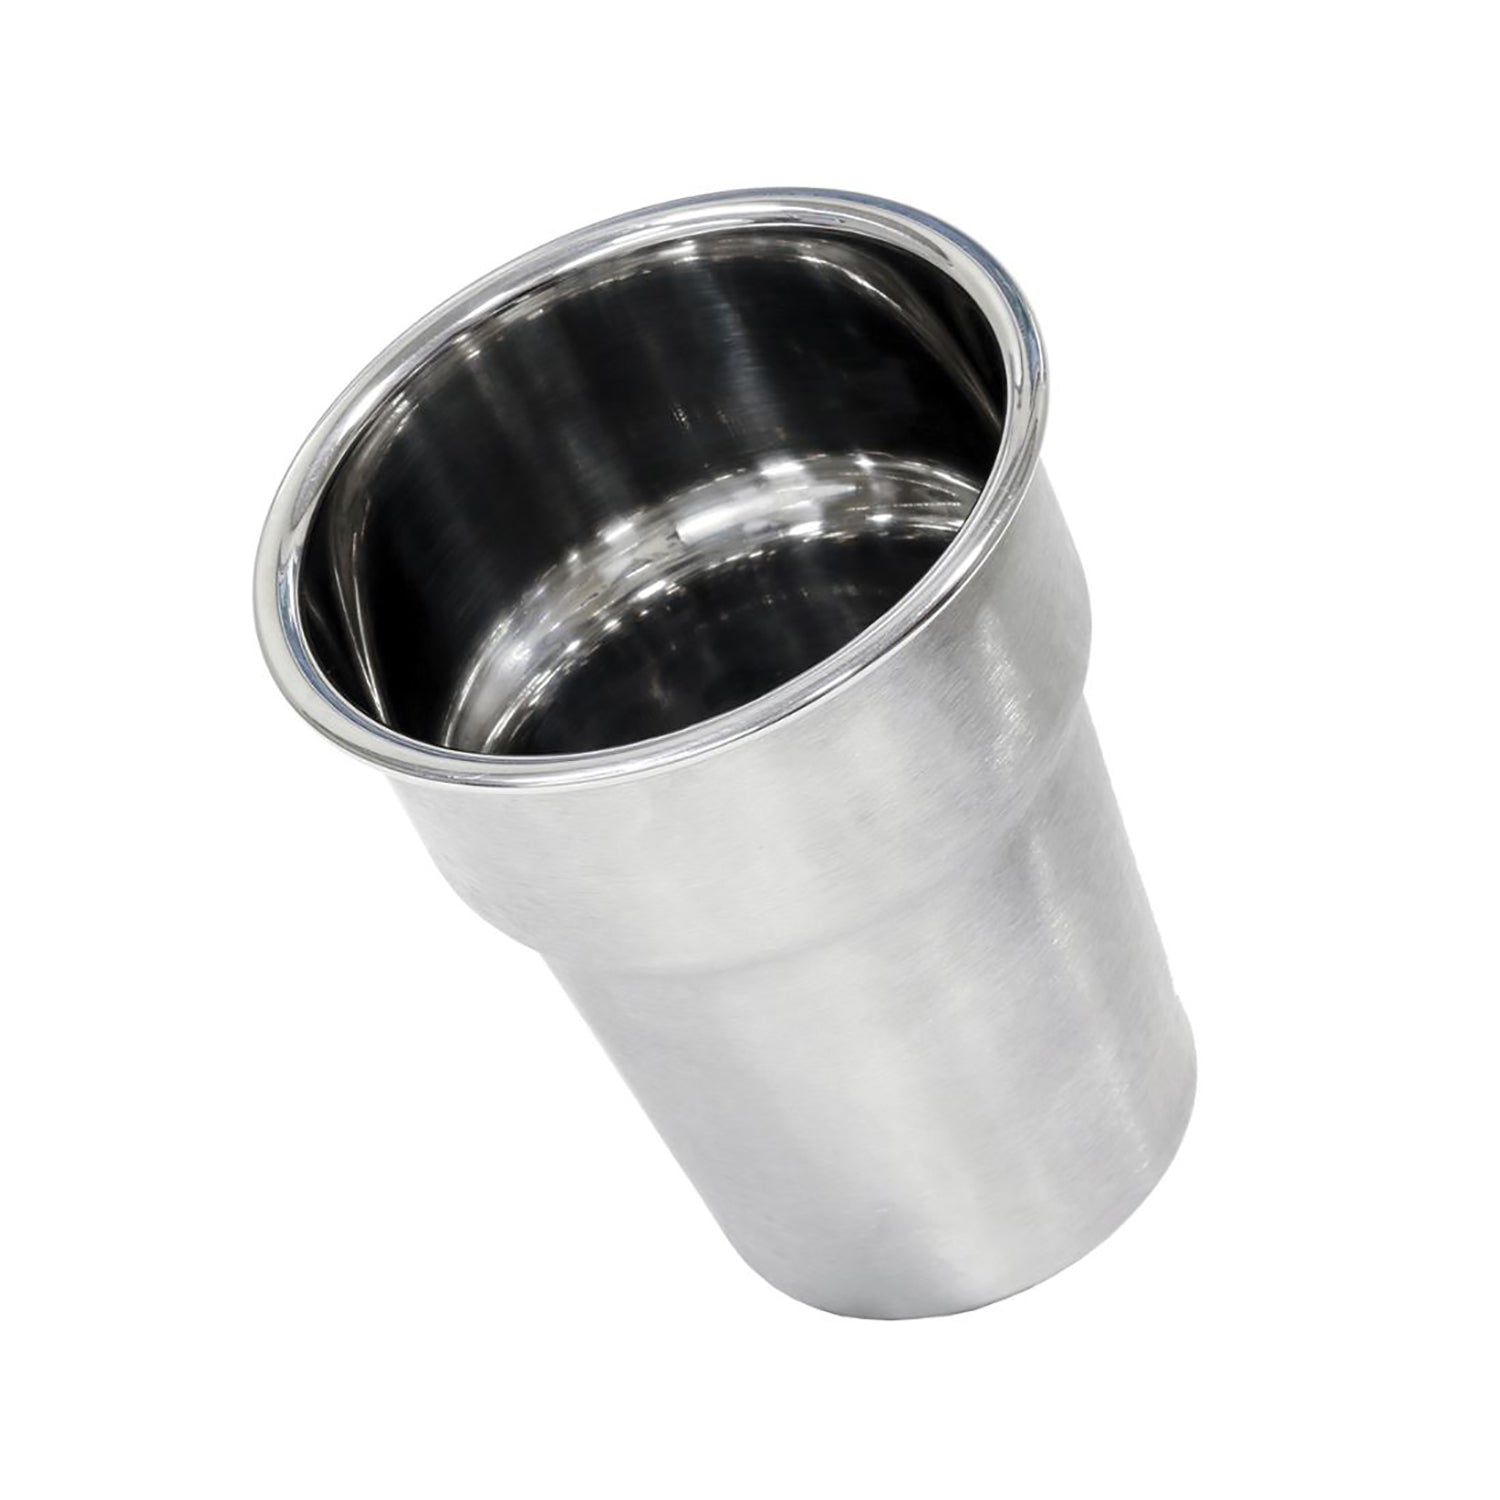 Large Cup Insert, Stainless-Steel - Tigress 88586